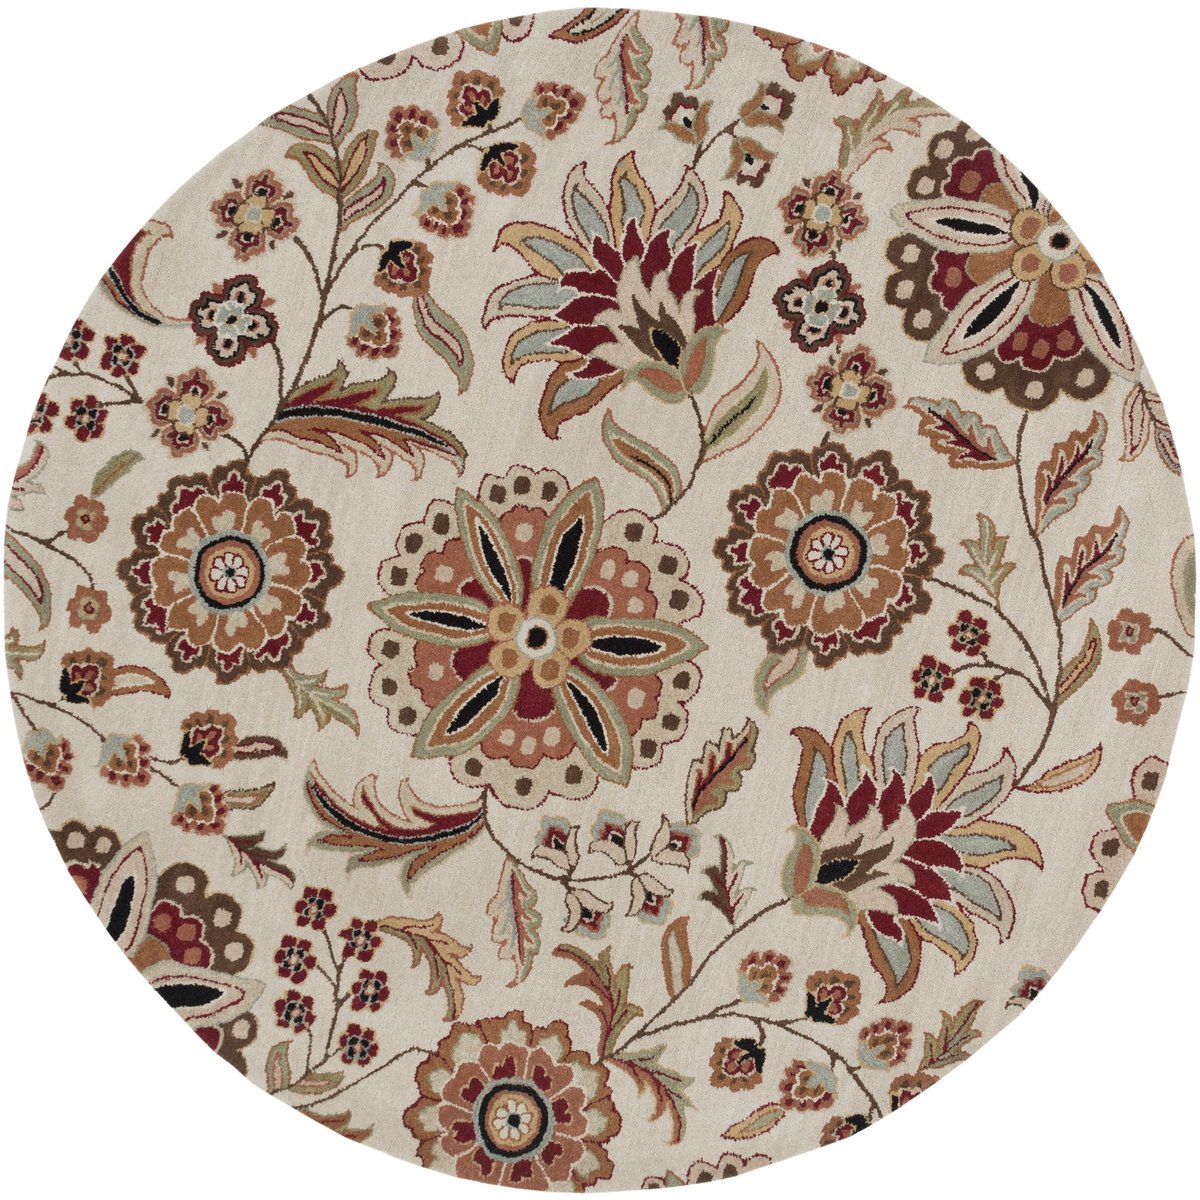 Olive Joy Carpets Kaleidoscope Highrise Whimsical Area Rugs 92-Inch by 129-Inch by 0.36-Inch 